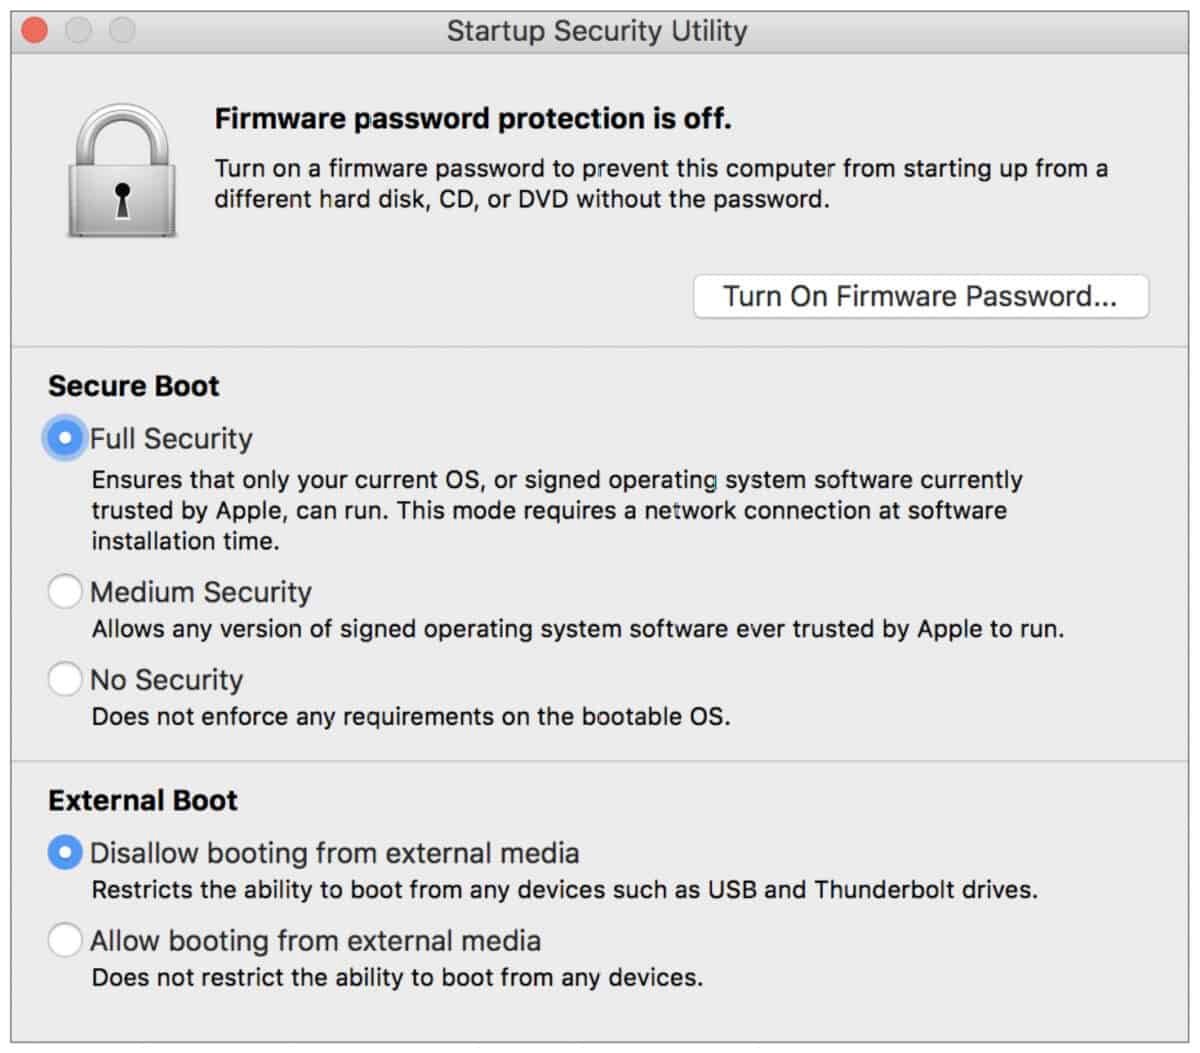 how to setup Startup Security Utility